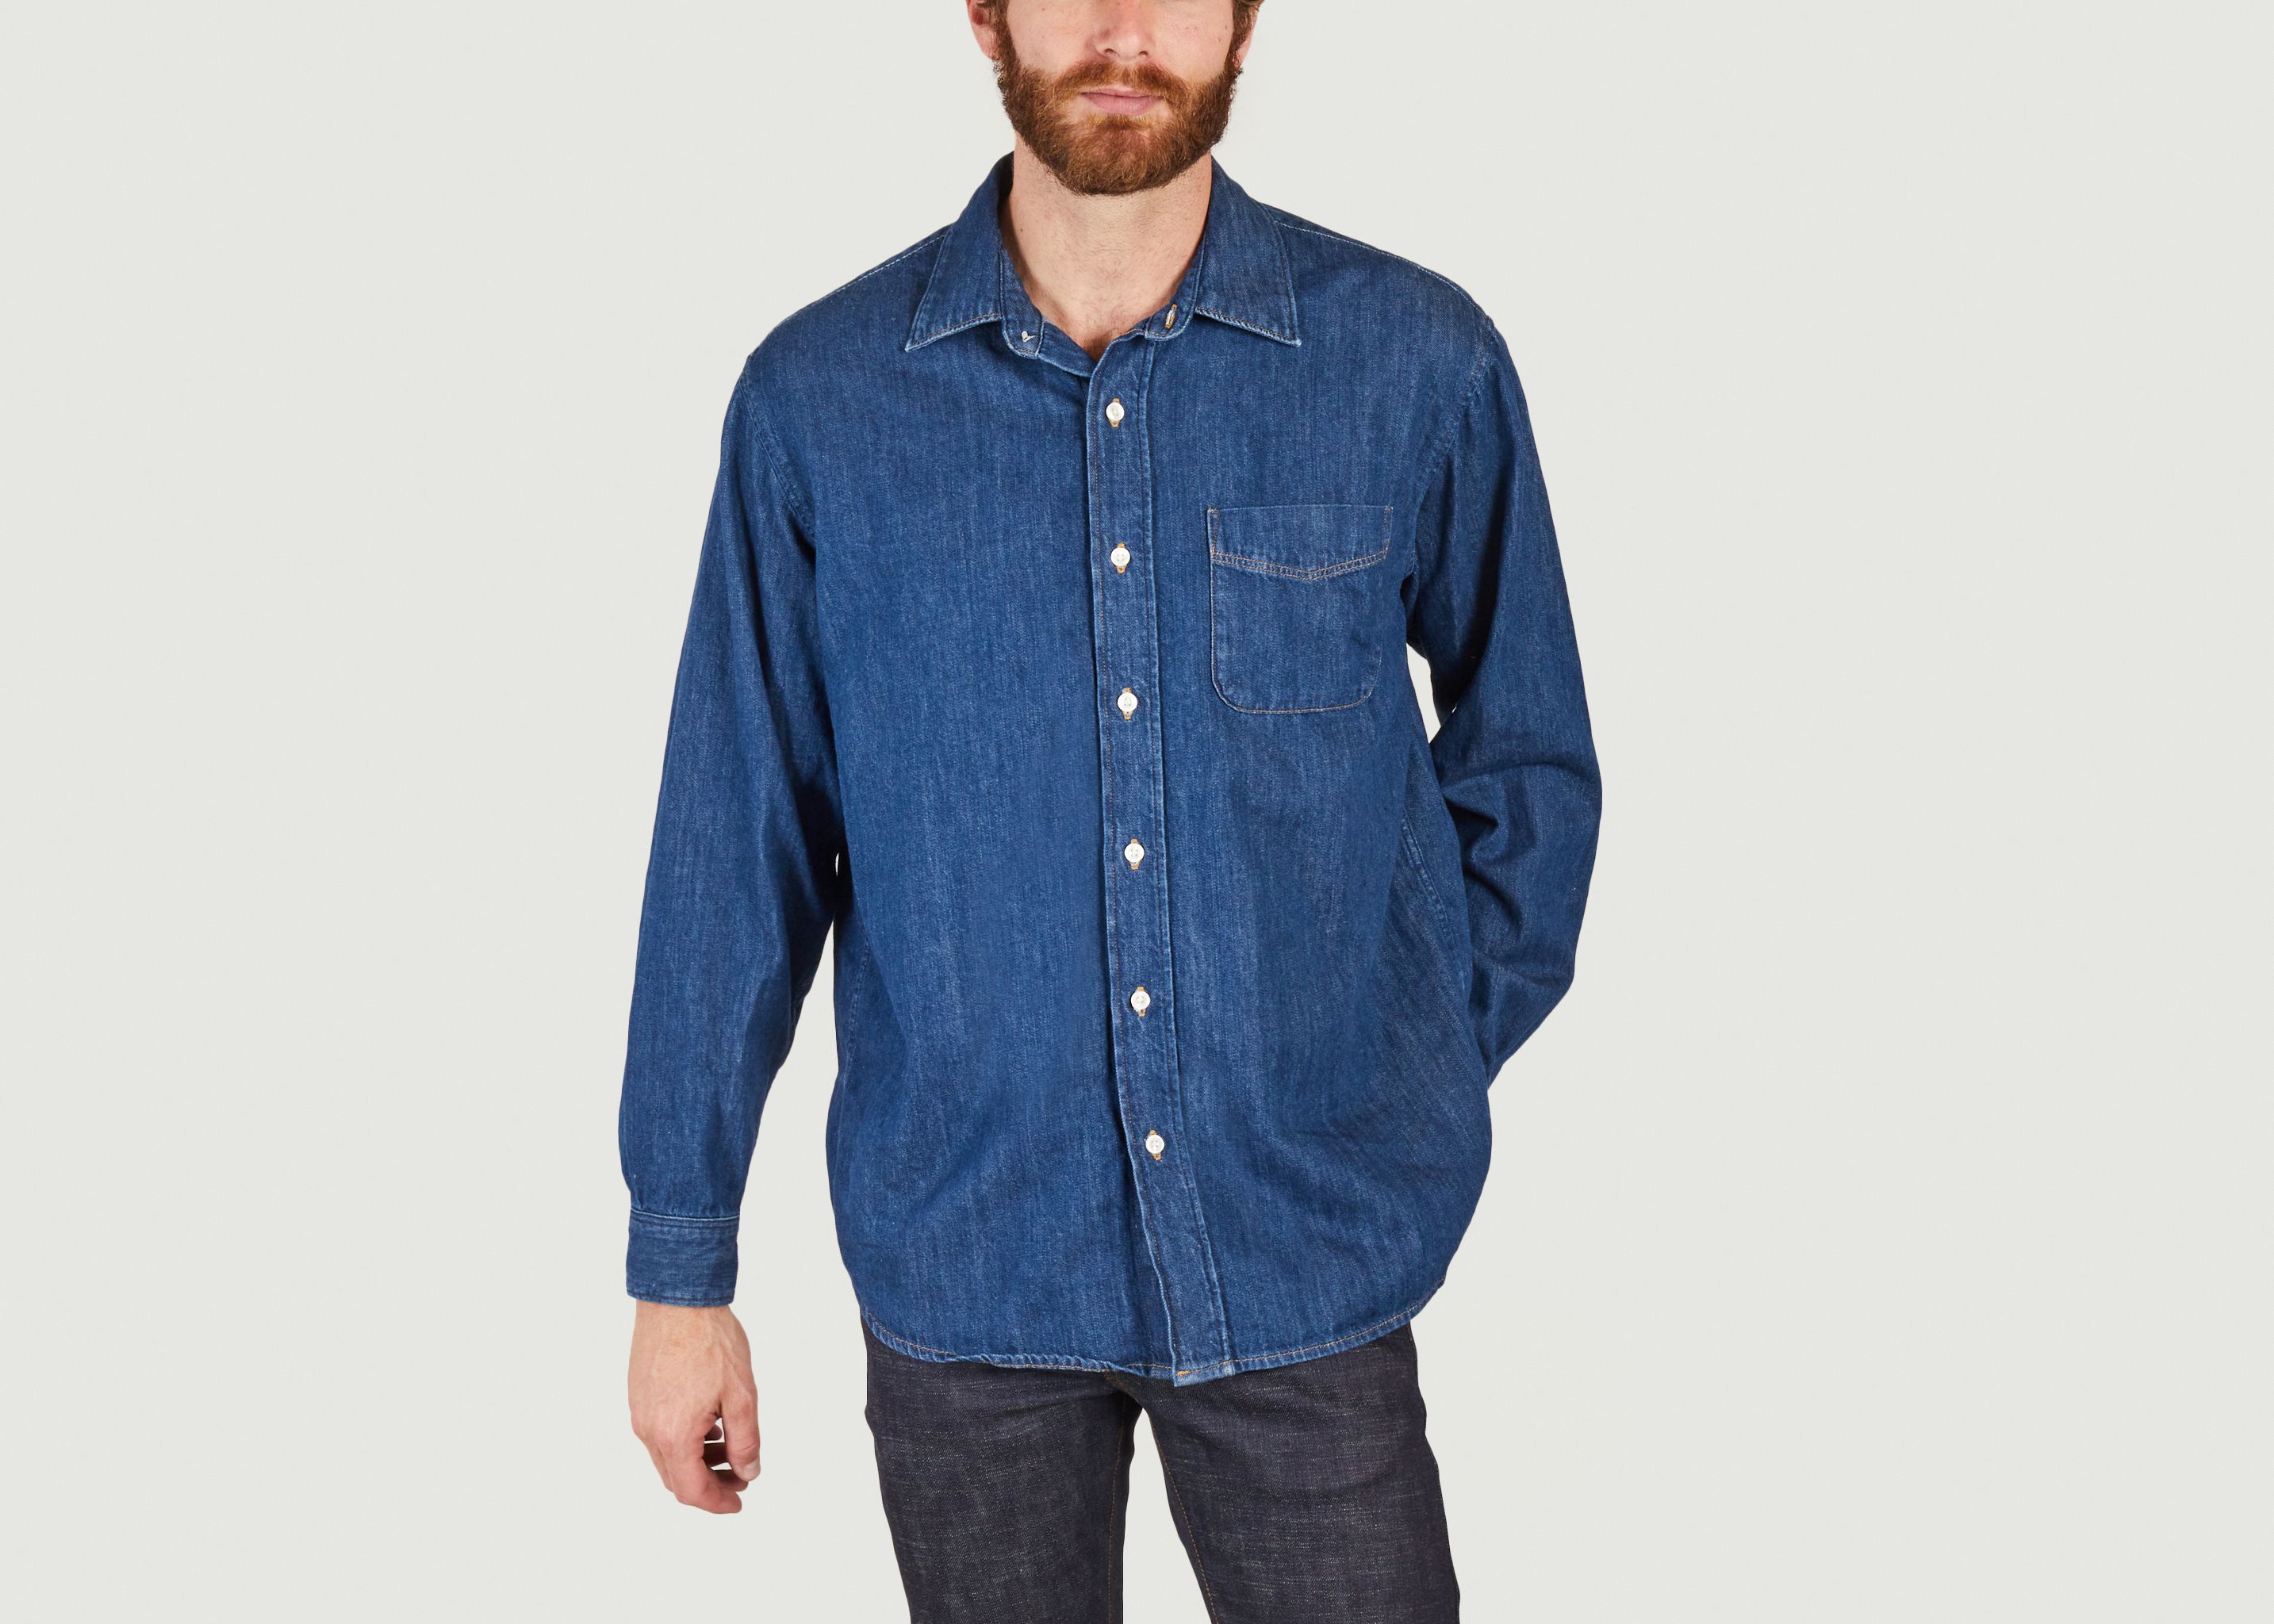 Casual Some Kind Of Blue Denim Shirt - Nudie Jeans